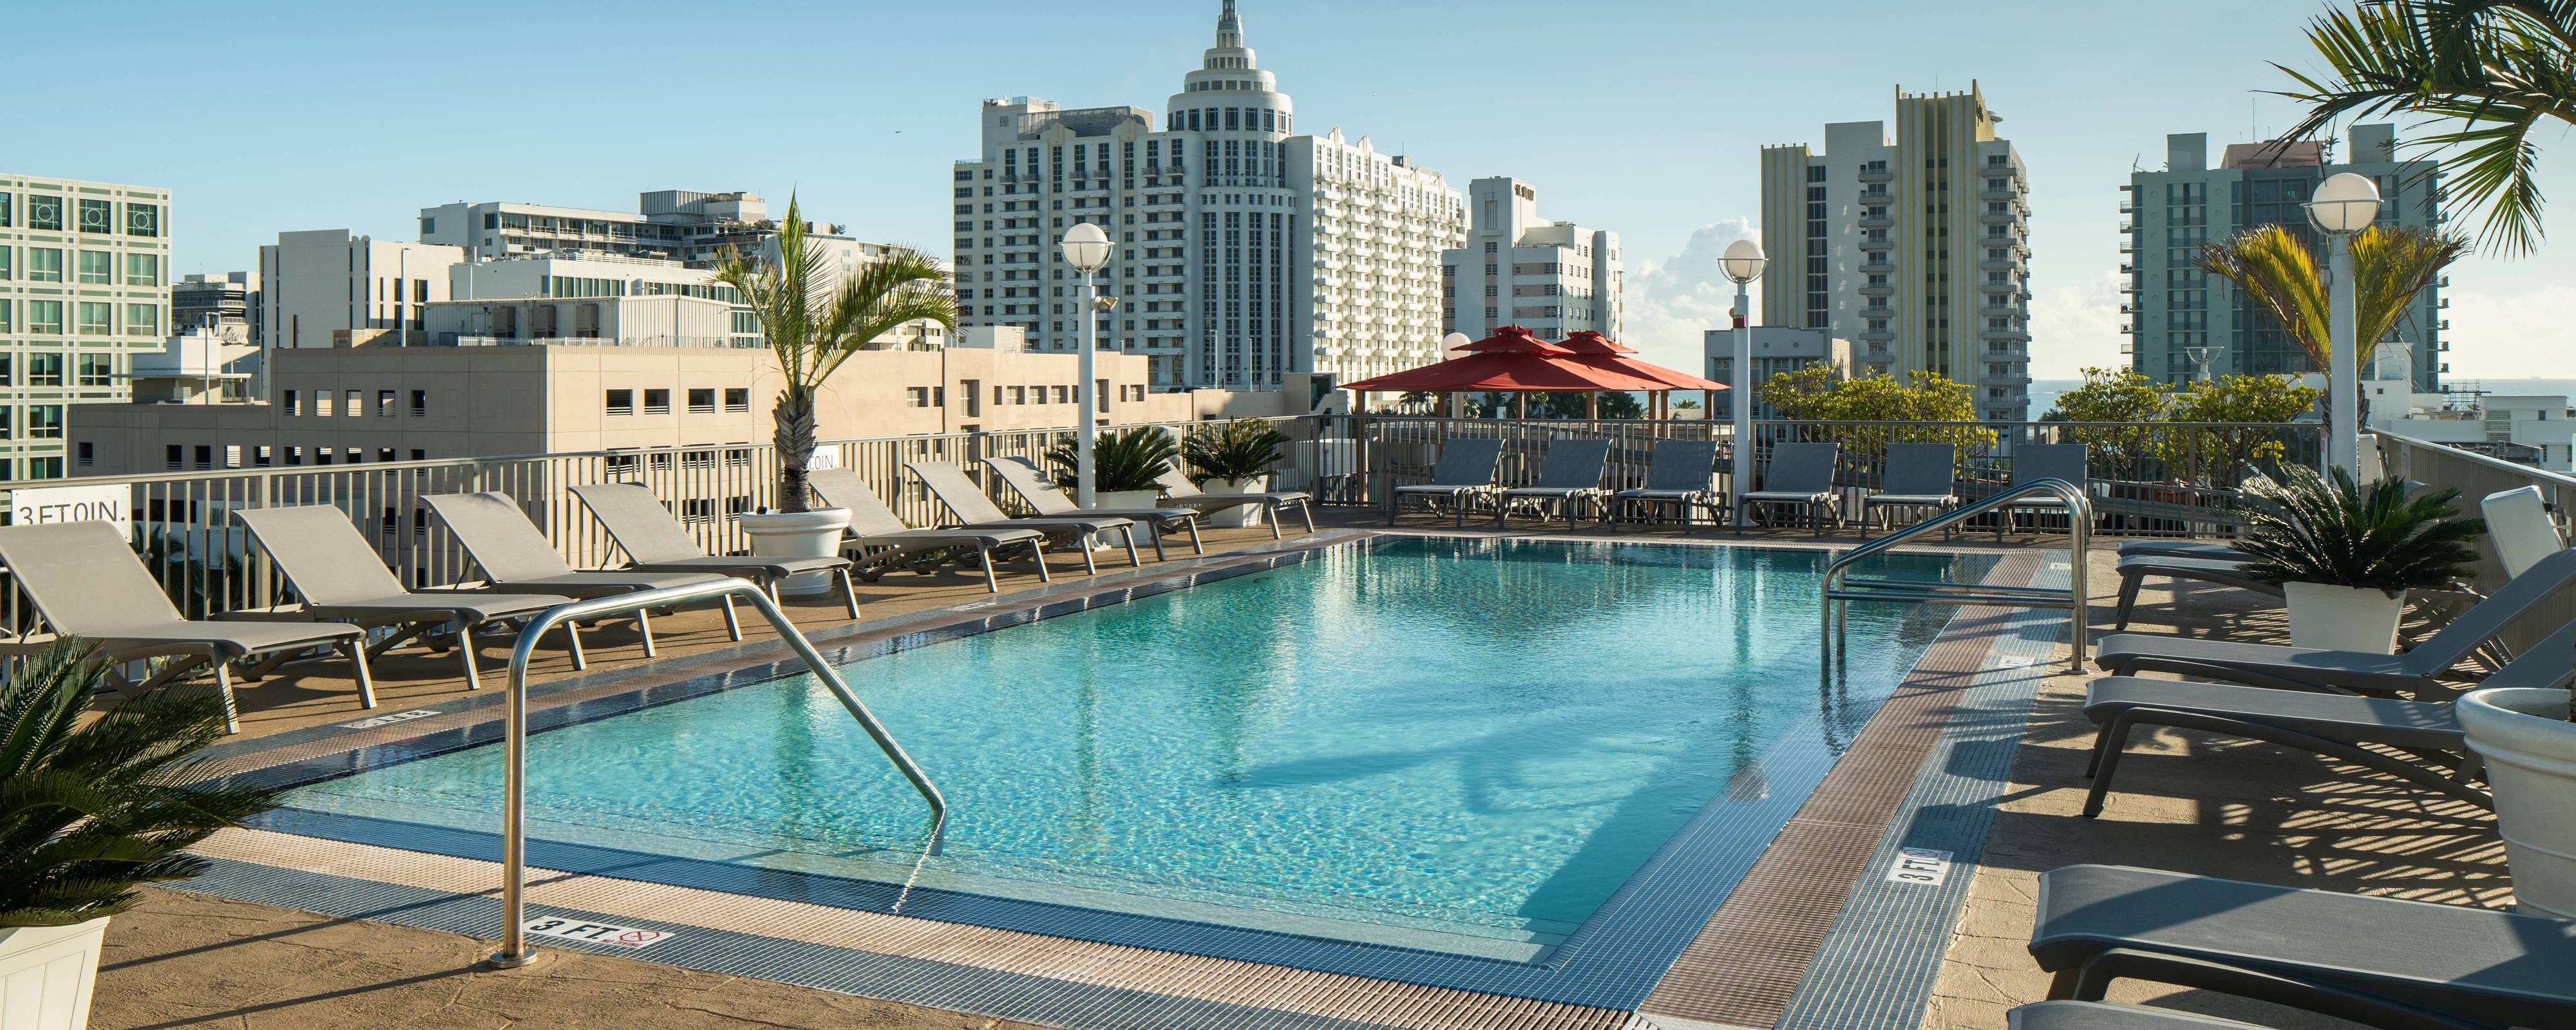 south beach hotel with rooftop pool | courtyard miami